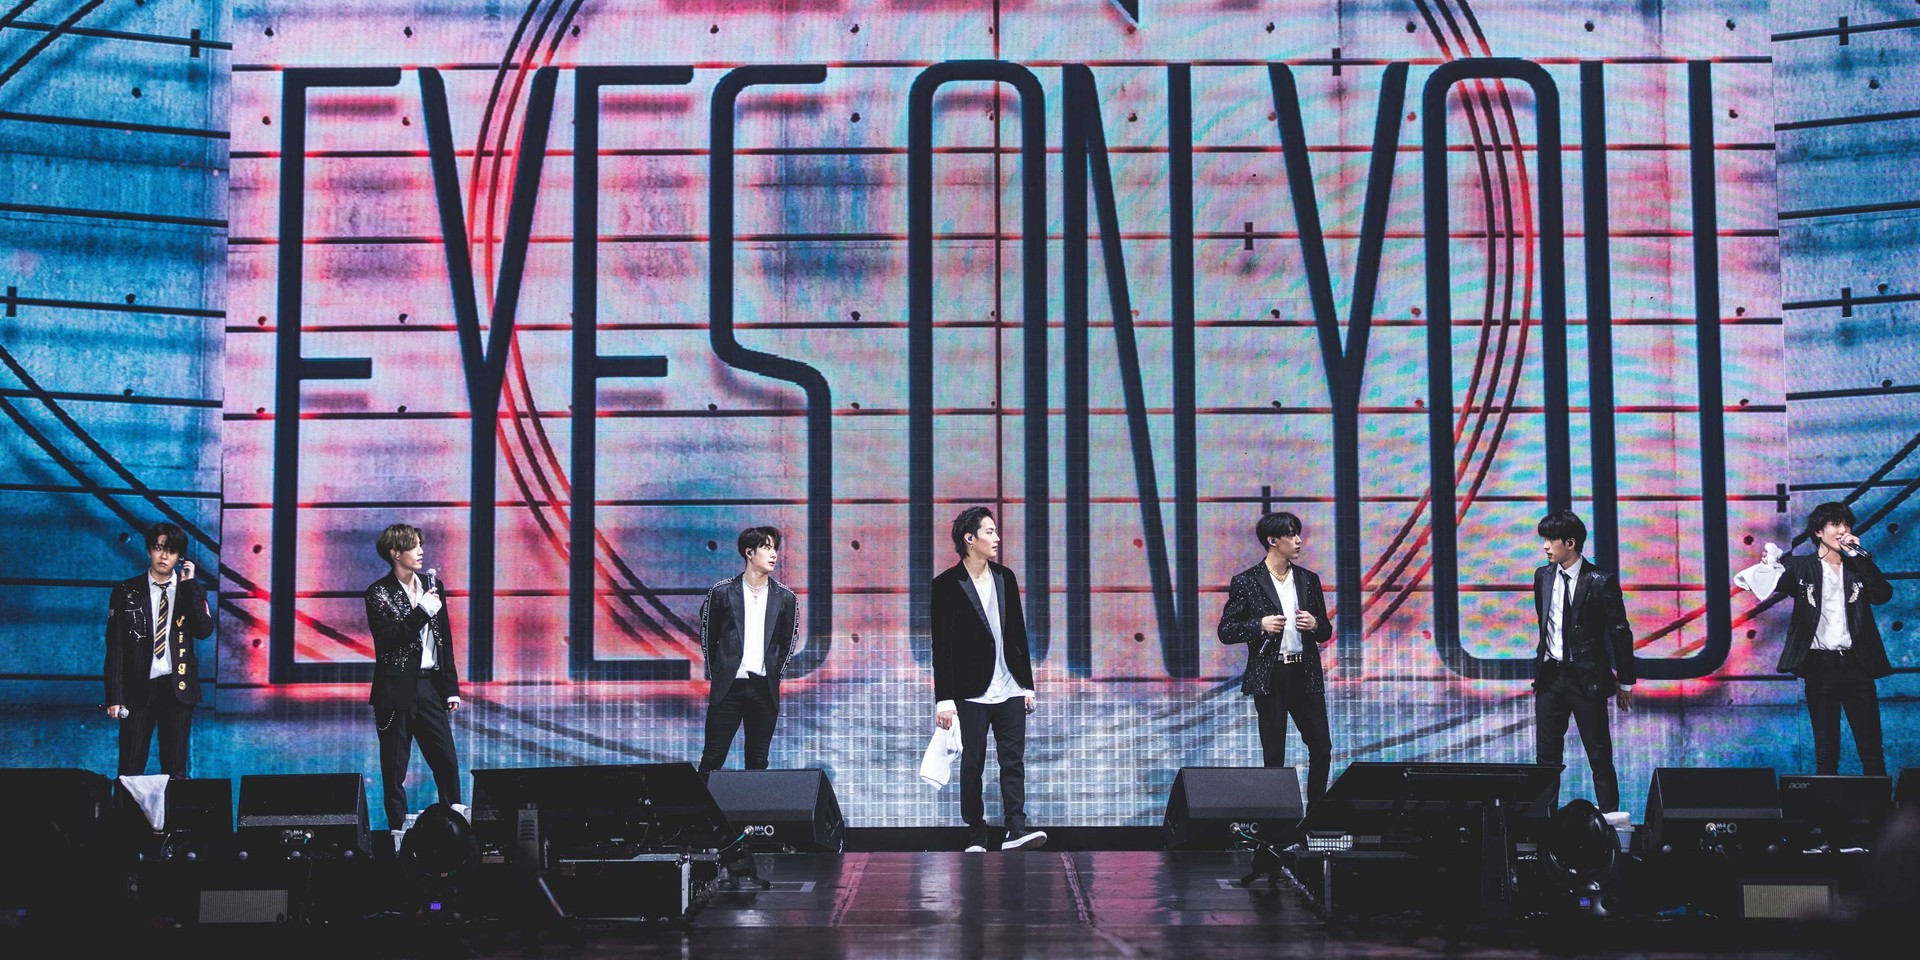 GOT7 mesmerizes the crowd at Singapore stop for 'Eyes On You' tour - gig report